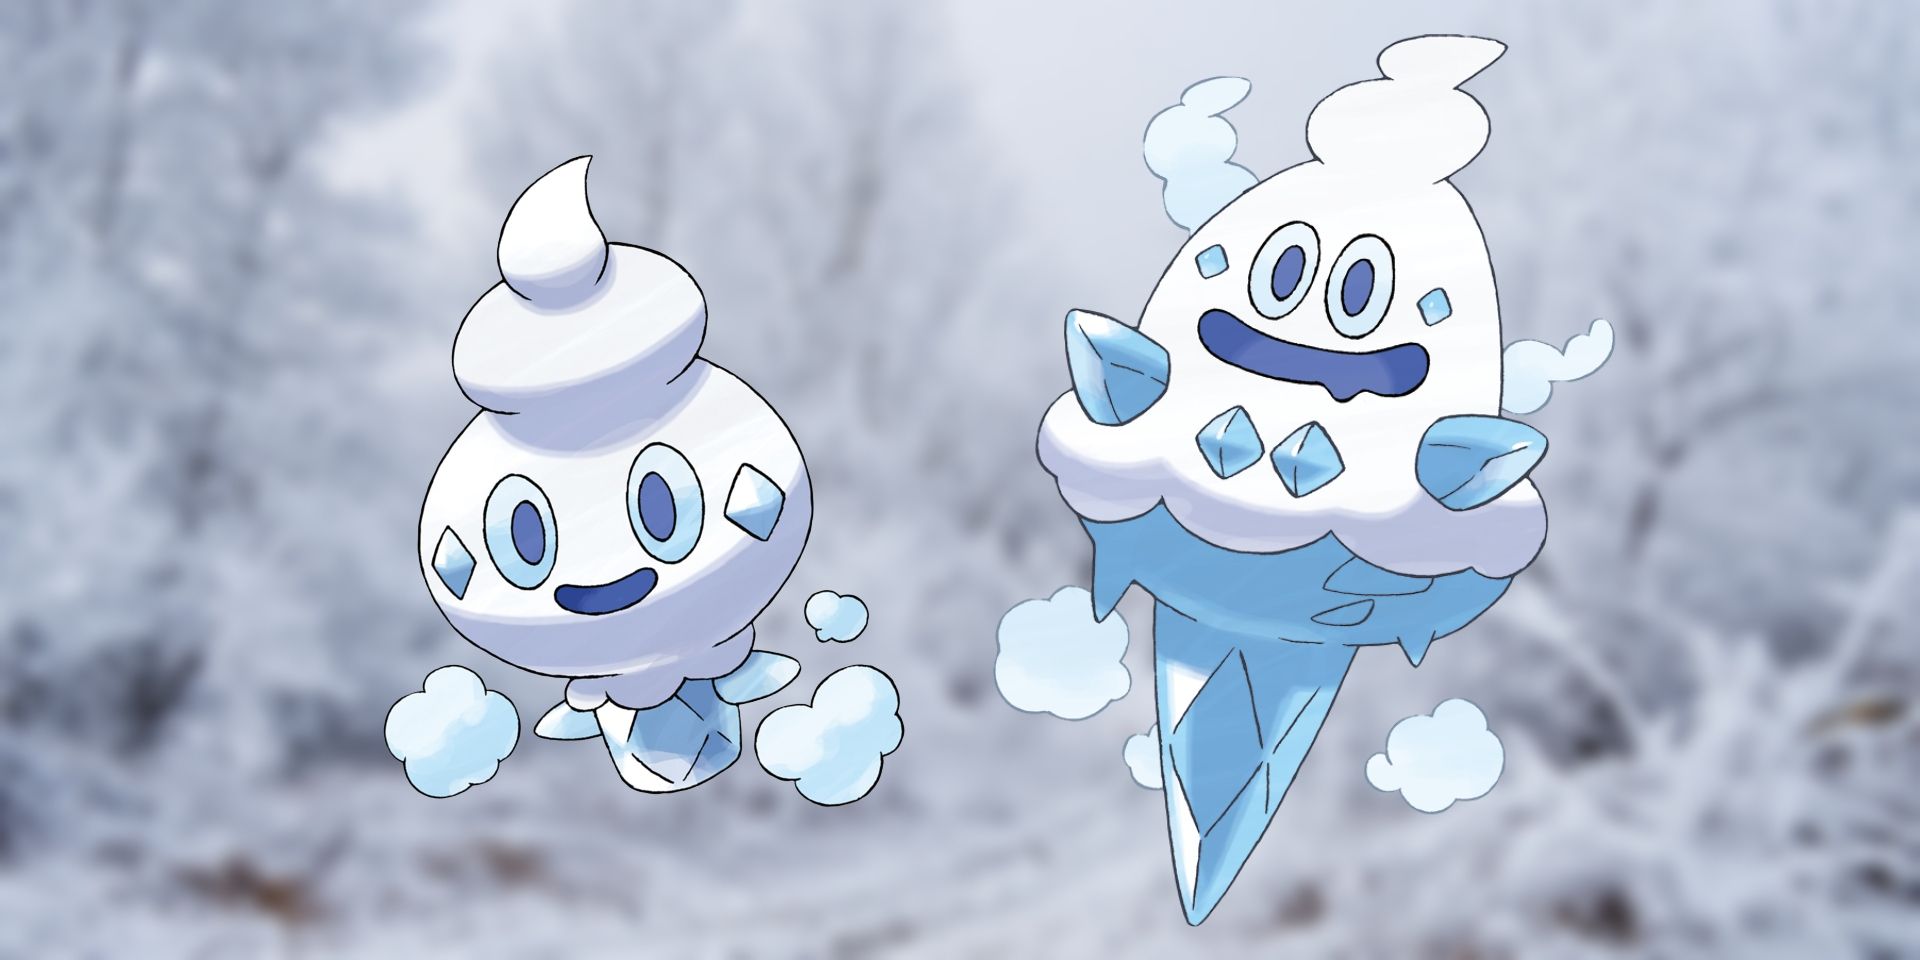 Pokémon Vanillite and Vanillish in front of a blurred icy forest.